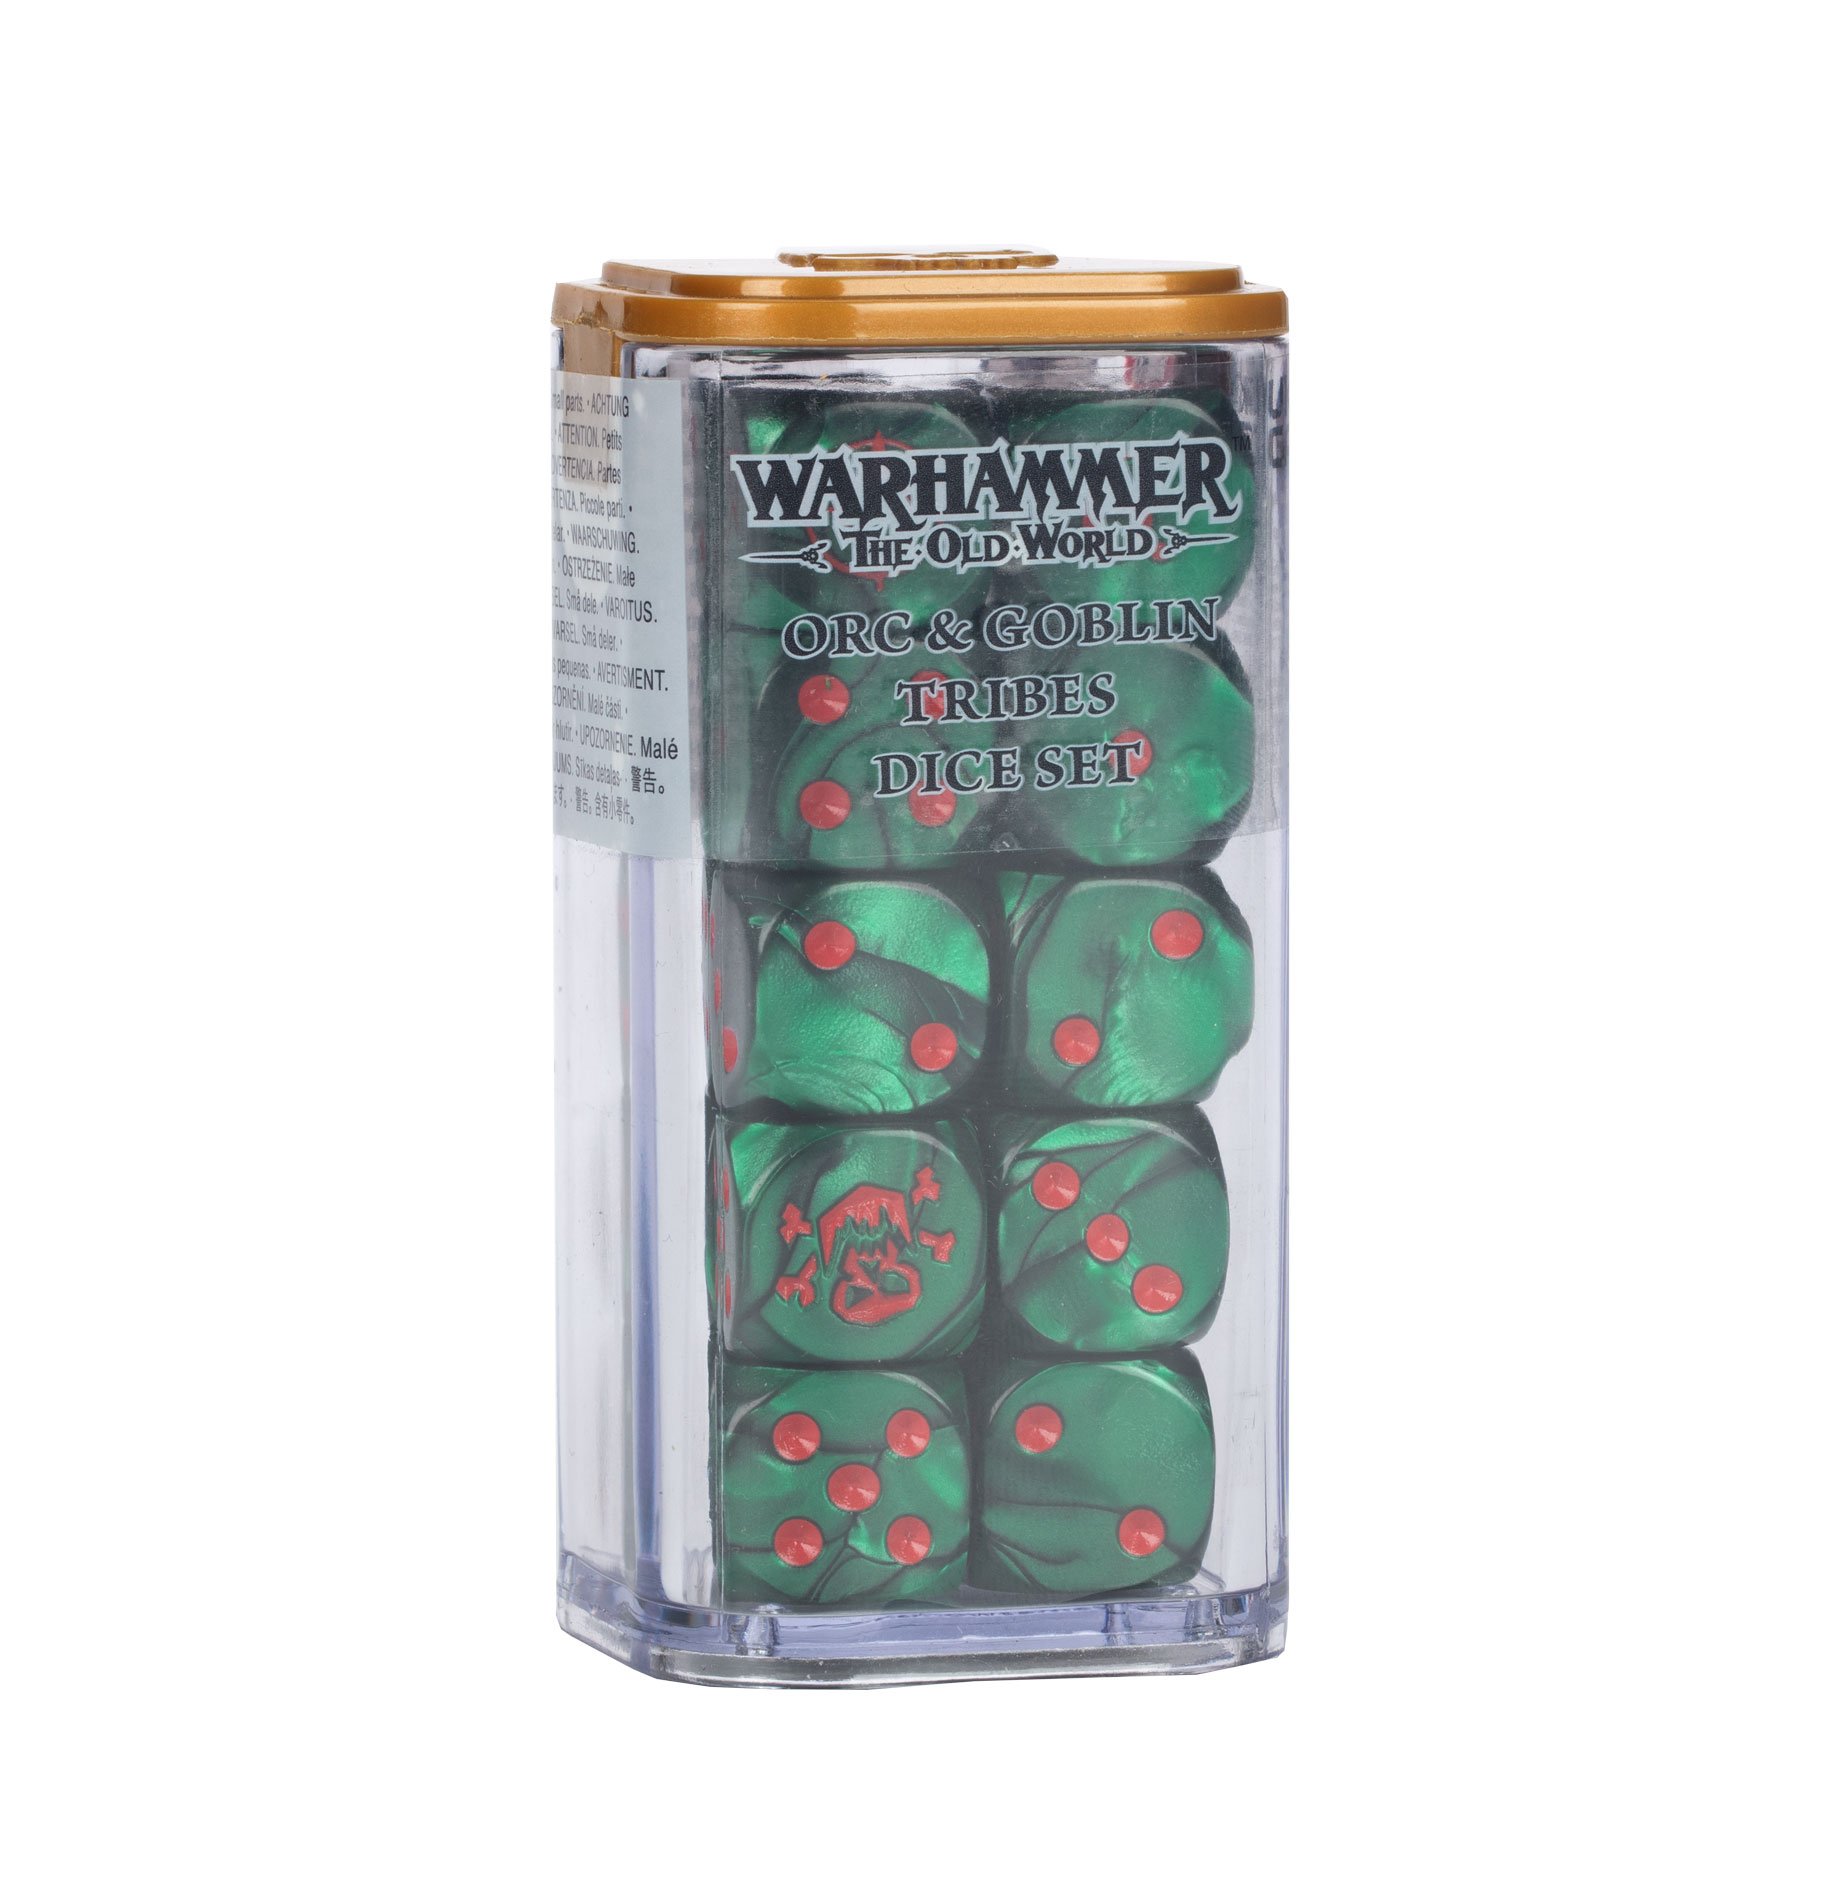 Dice Set - Orc & Goblin Tribes - 09-04 - Warhammer - The Old World